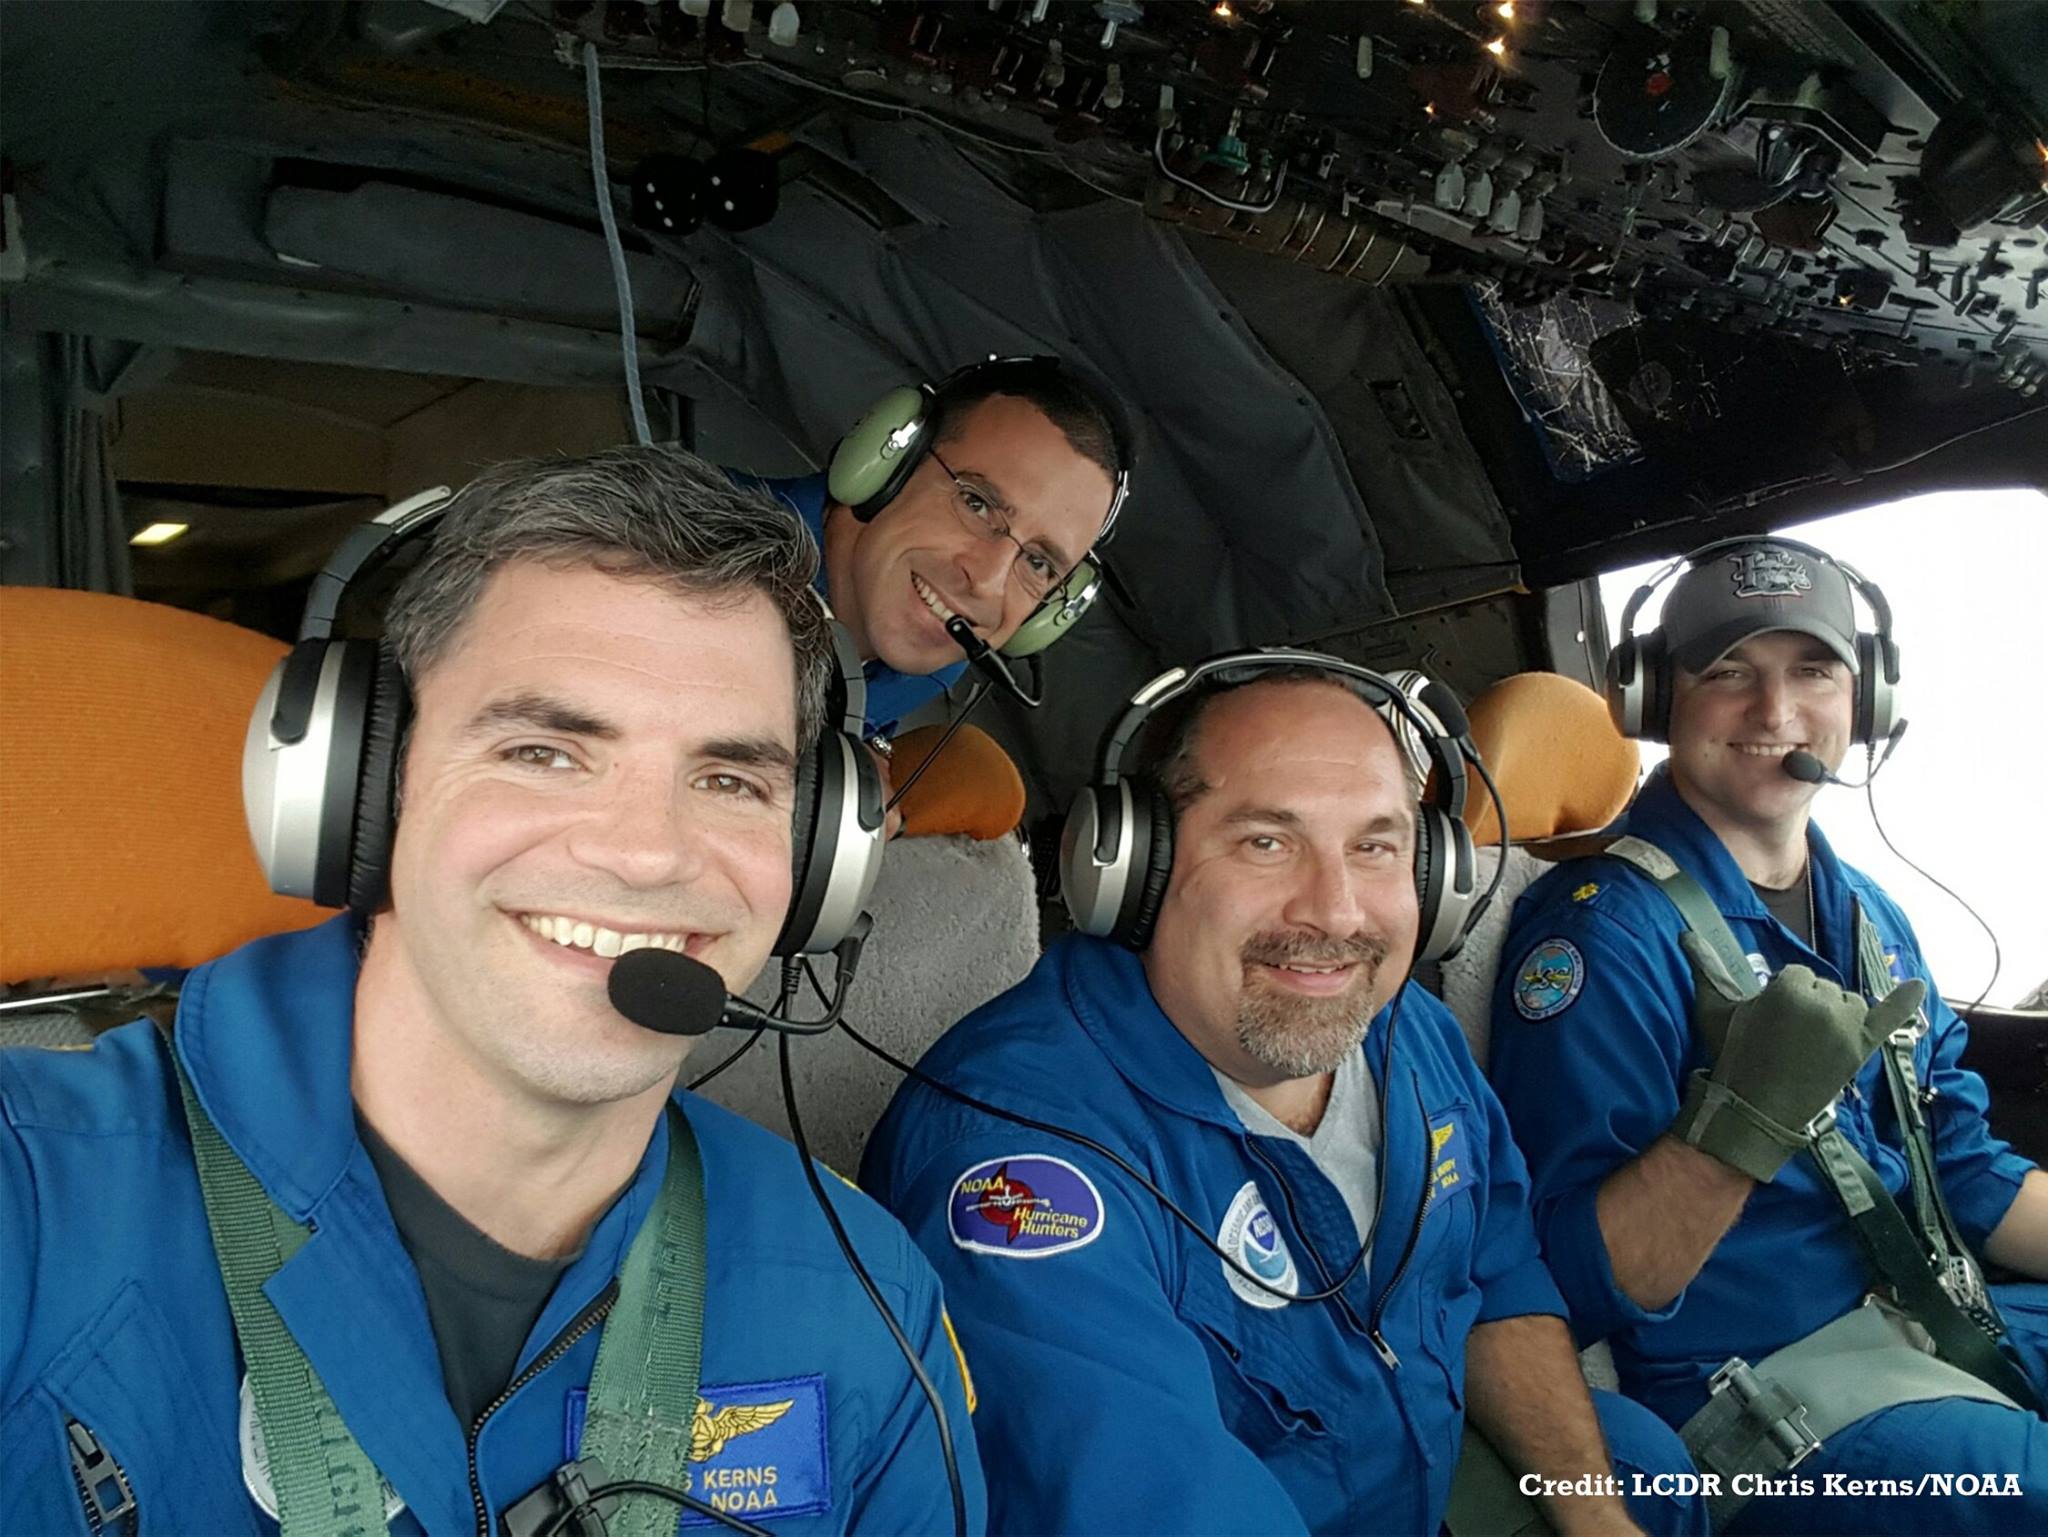 From left to right: Pilot LCDR Chris Kerns, Navigator CAPT Tim Gallagher, Flight Engineer Paul Darby, and Pilot LCDR Nathan Kahn. Photo: NOAA